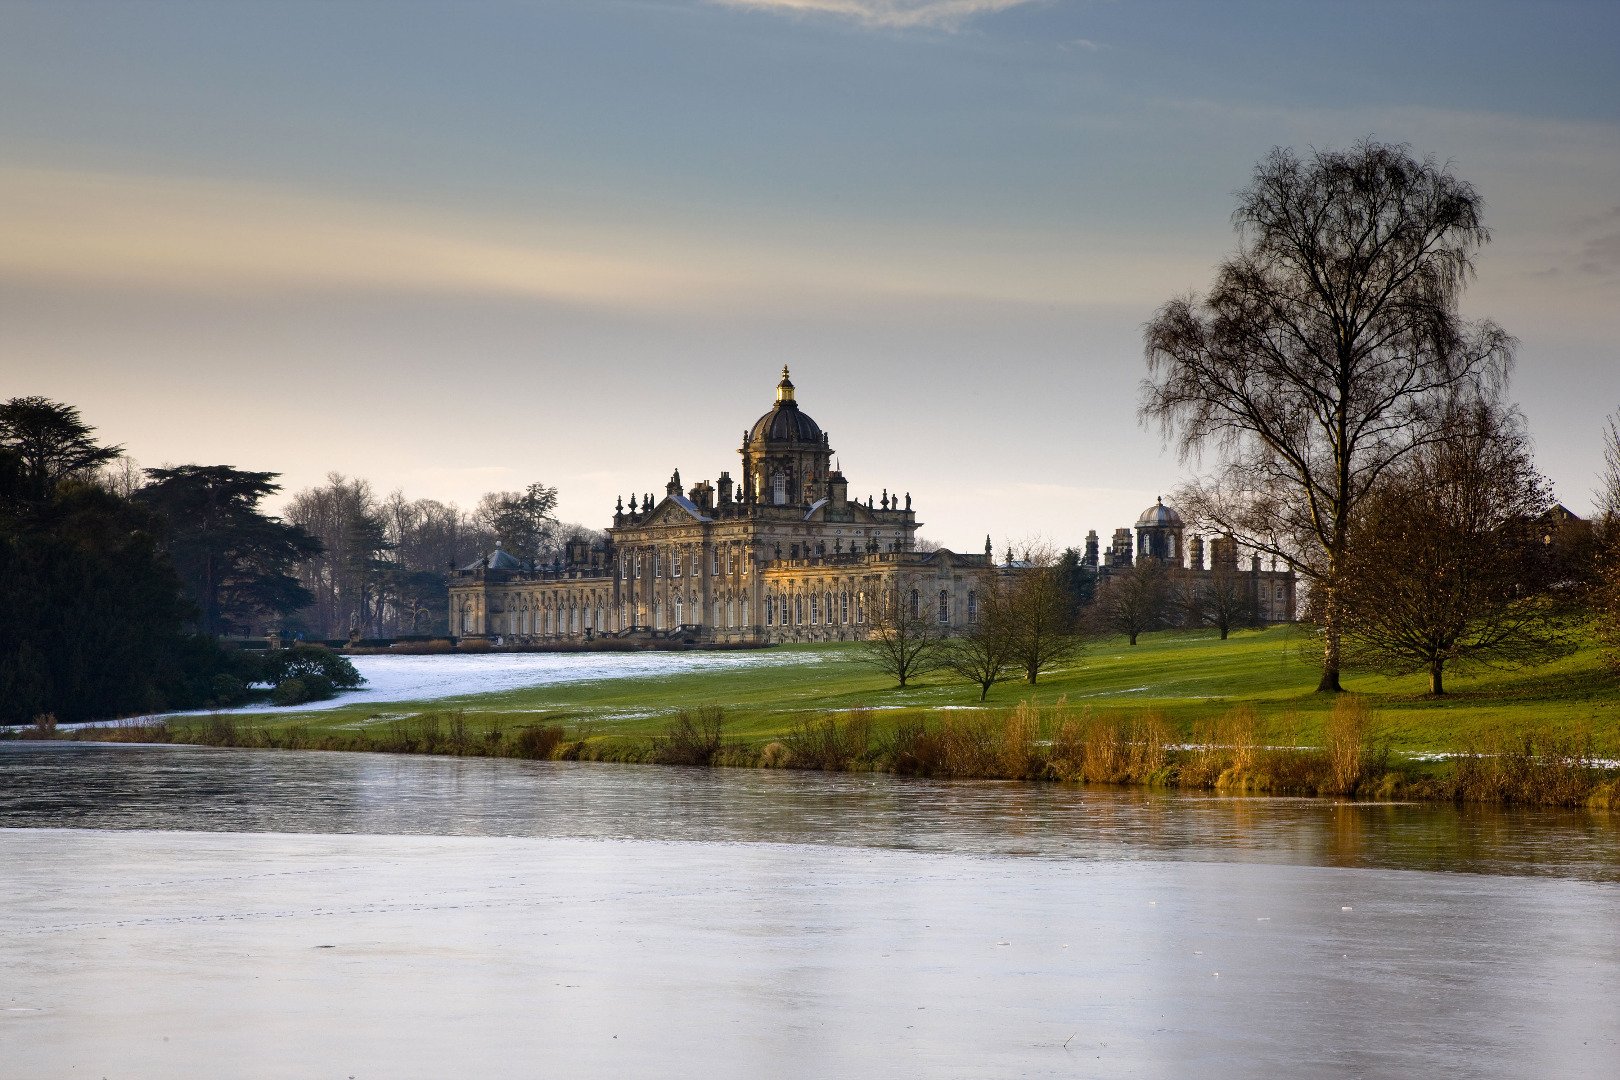 Image name castle howard and south lake mike kipling the 6 image from the post Yorkshire Stately Homes and Gardens in Yorkshire.com.